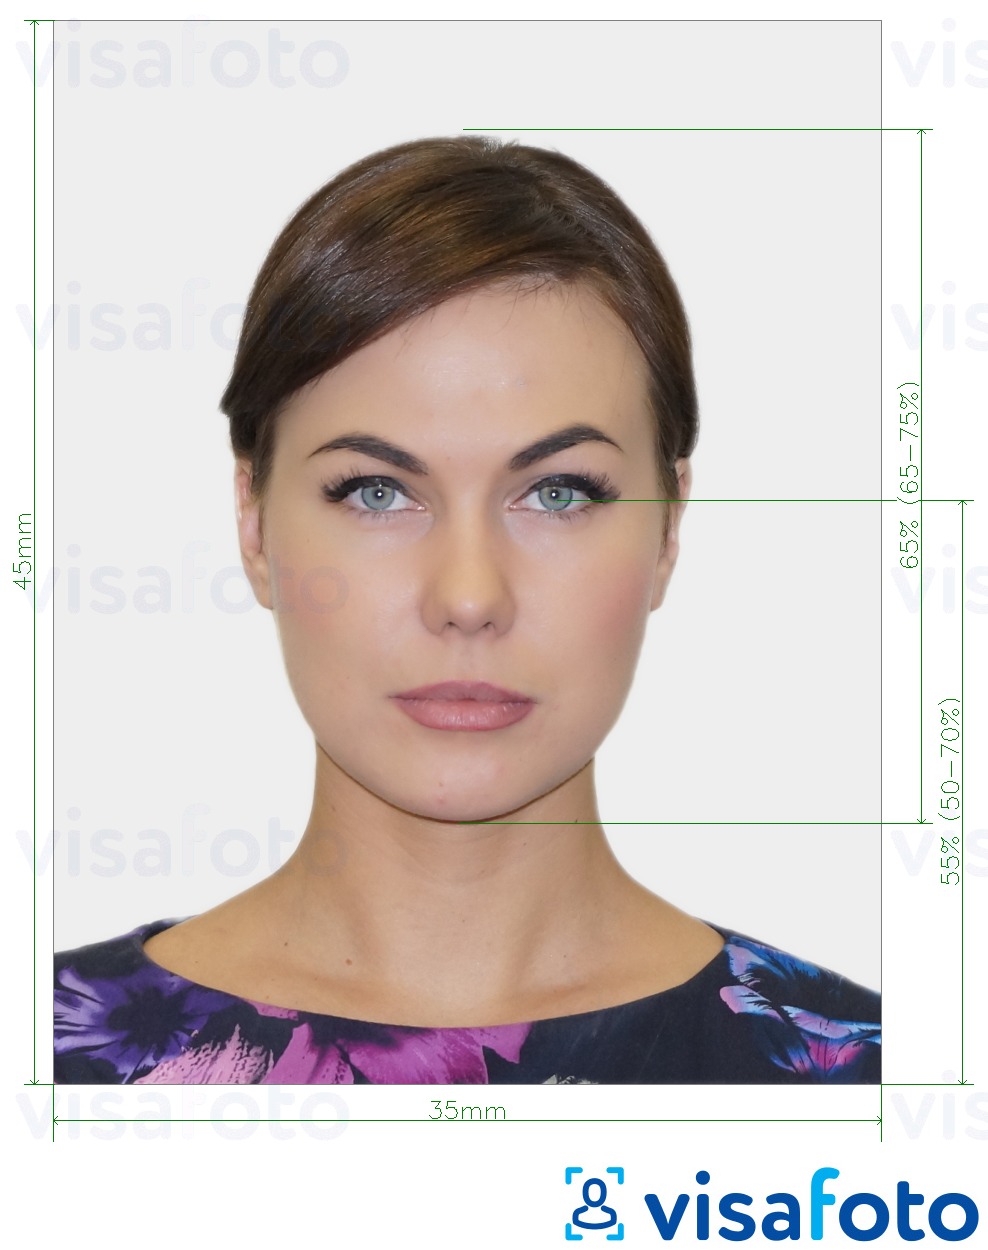 Example of photo for New Zealand Passport Offline with exact size specification